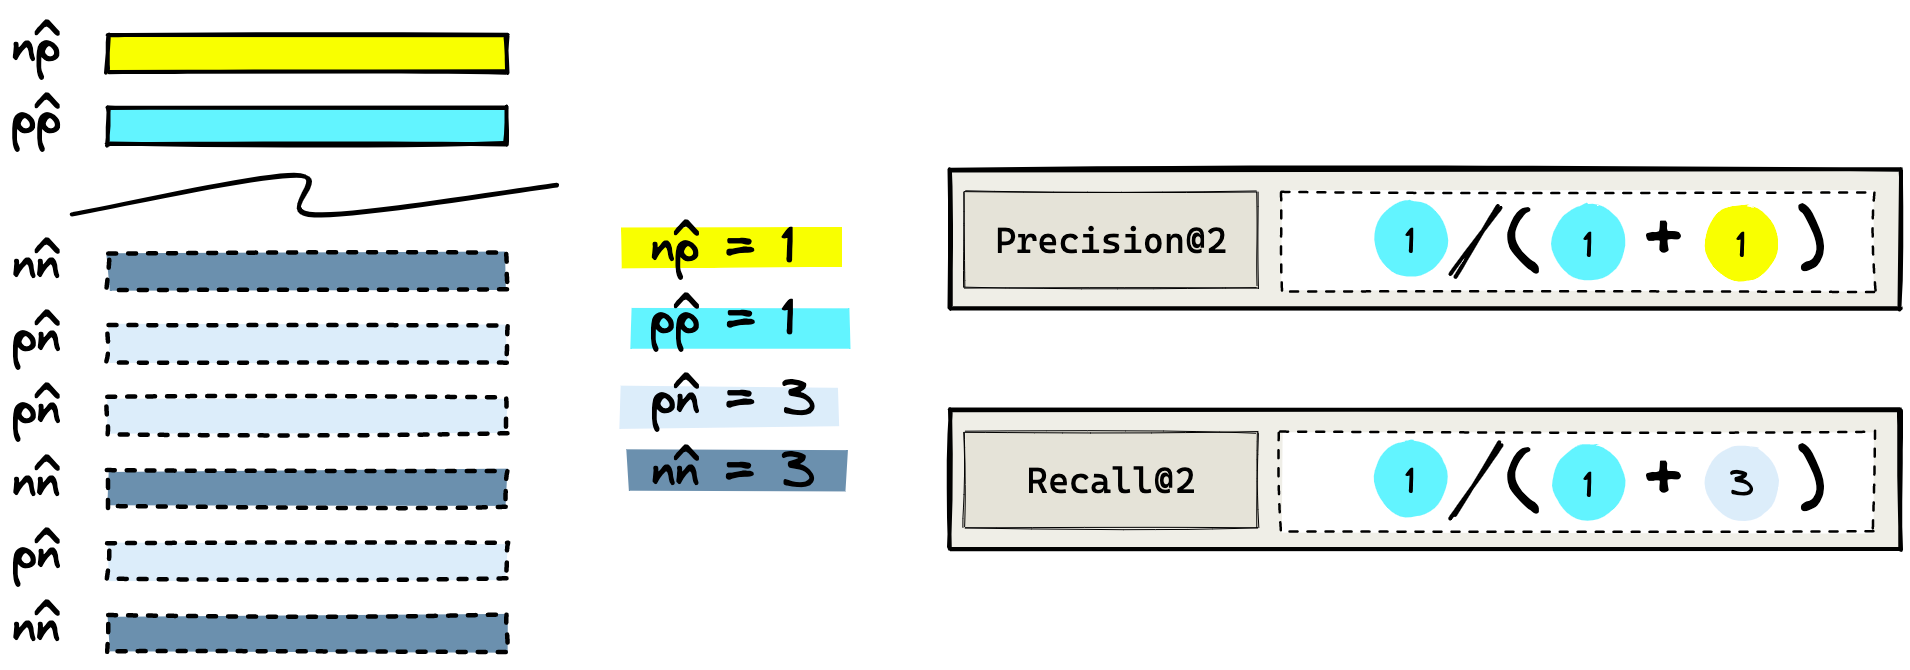 The difference between Recall@K and Precision@K calculation where K = 2.